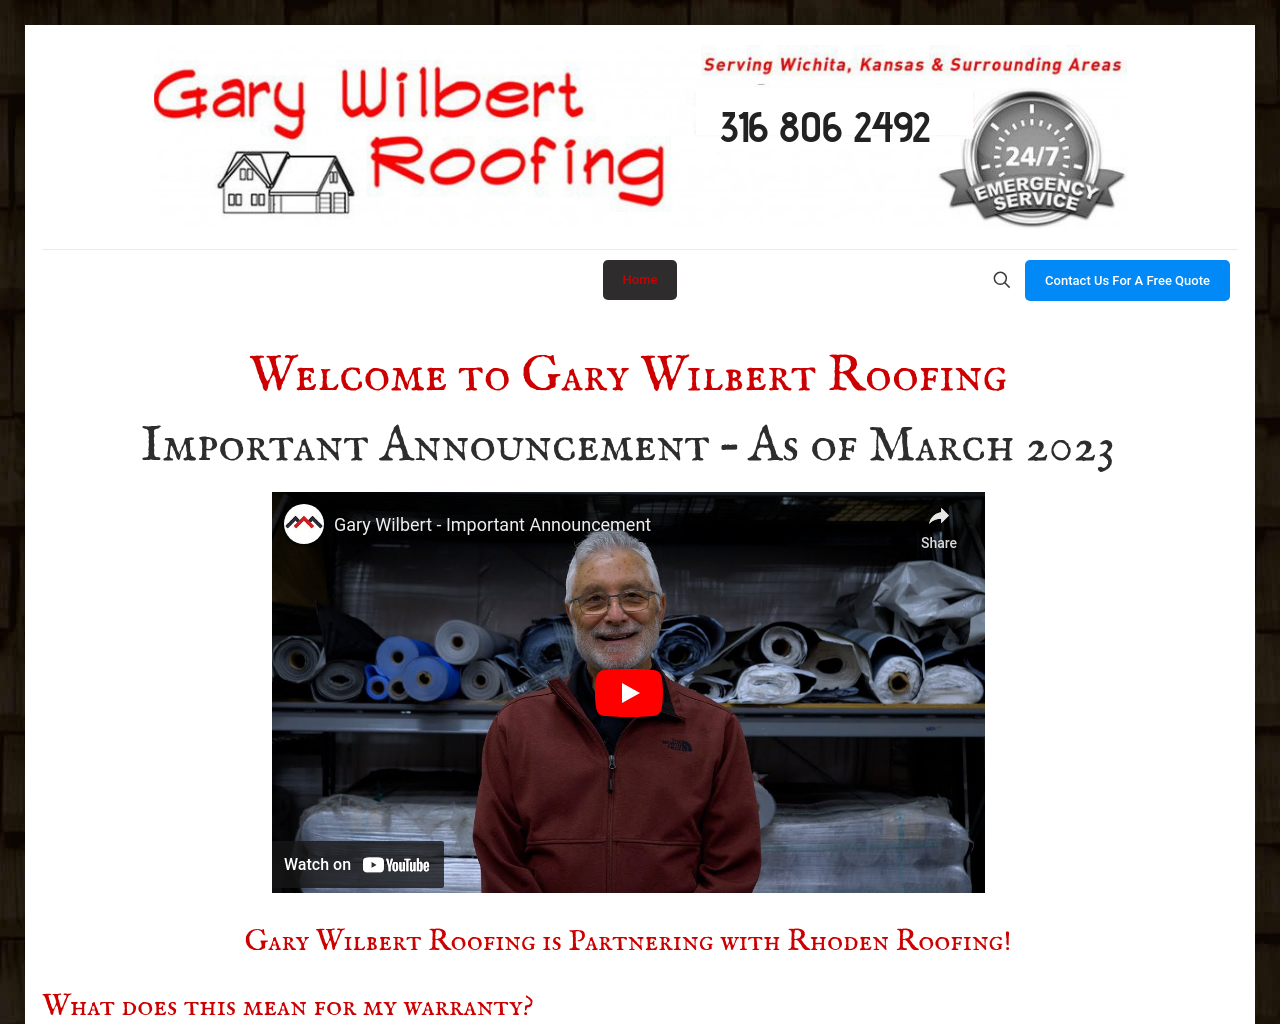 garywilbertroofing.com